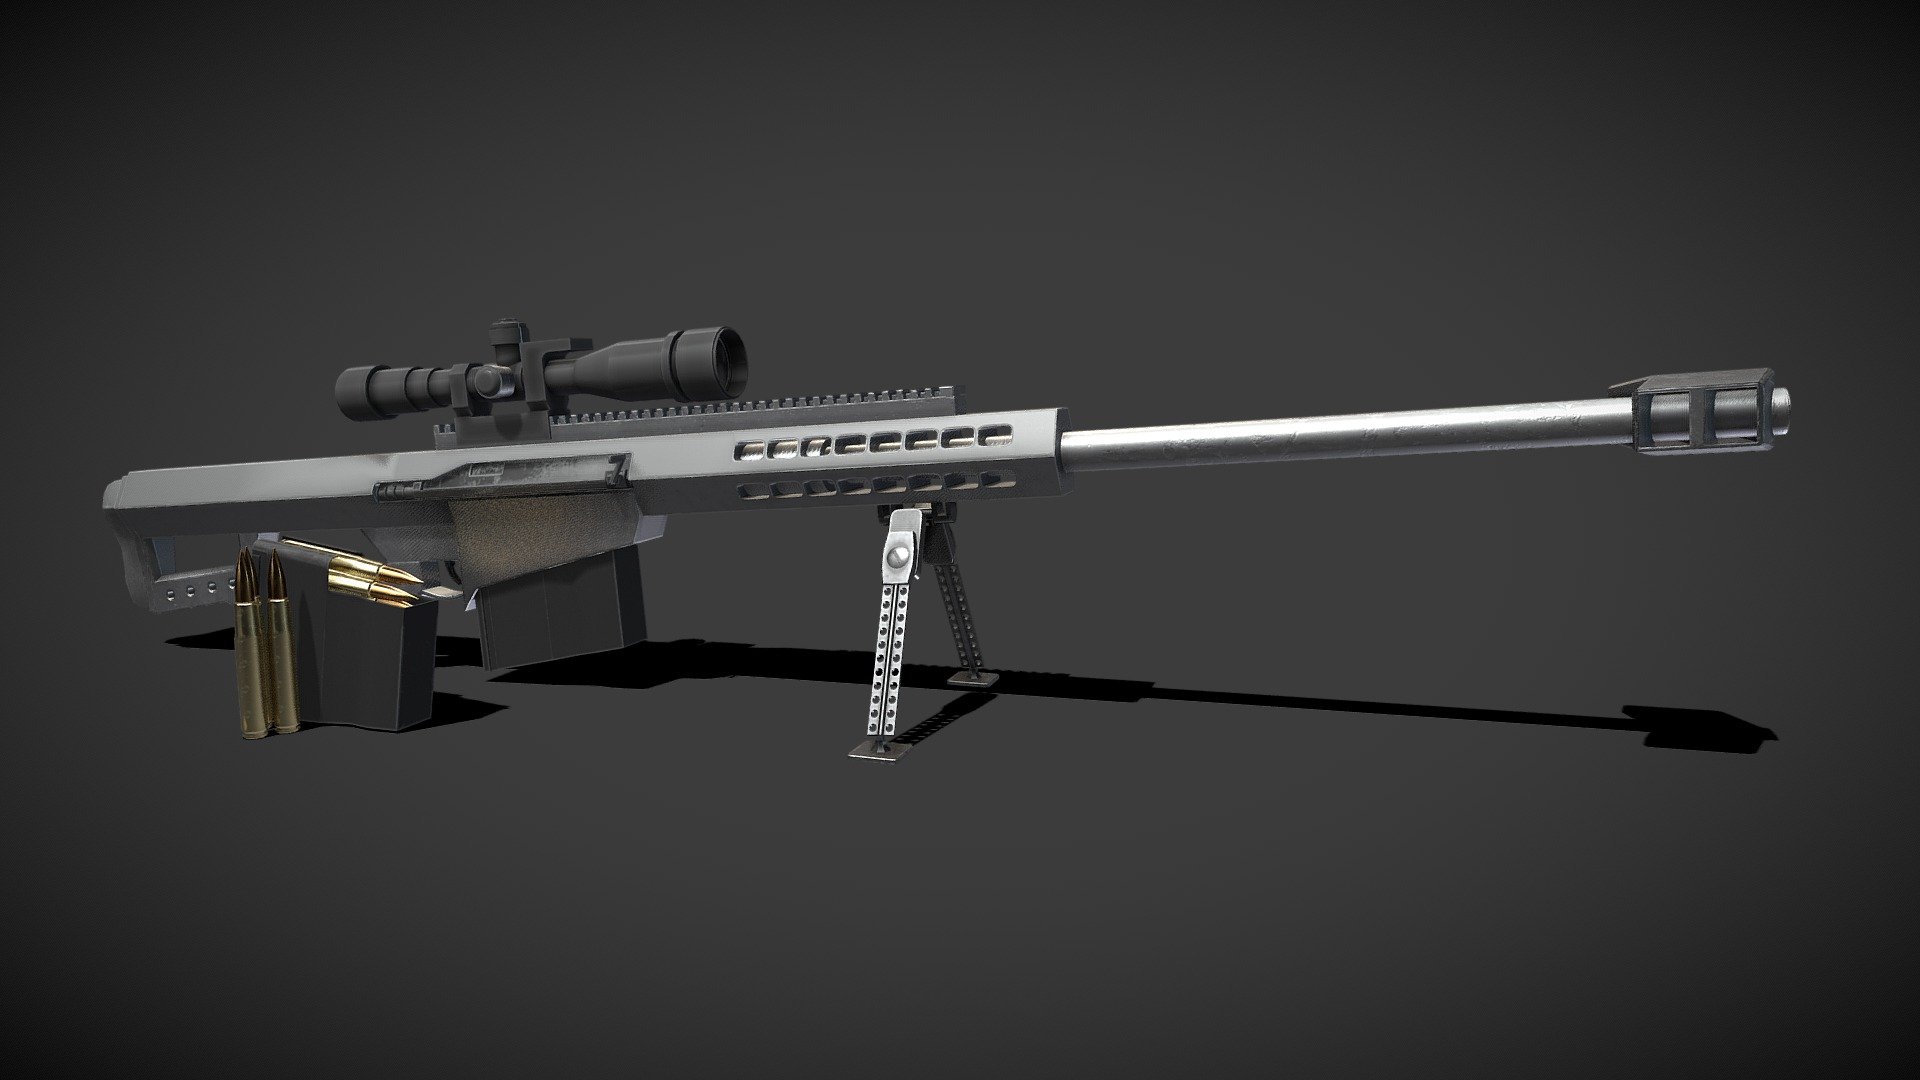 3D model of the Barrett 50. Cal Sniper Rifle made in Maya and textured in Substance Painter,
Model is completed with extra magazines and 50. cal bullets 3d model